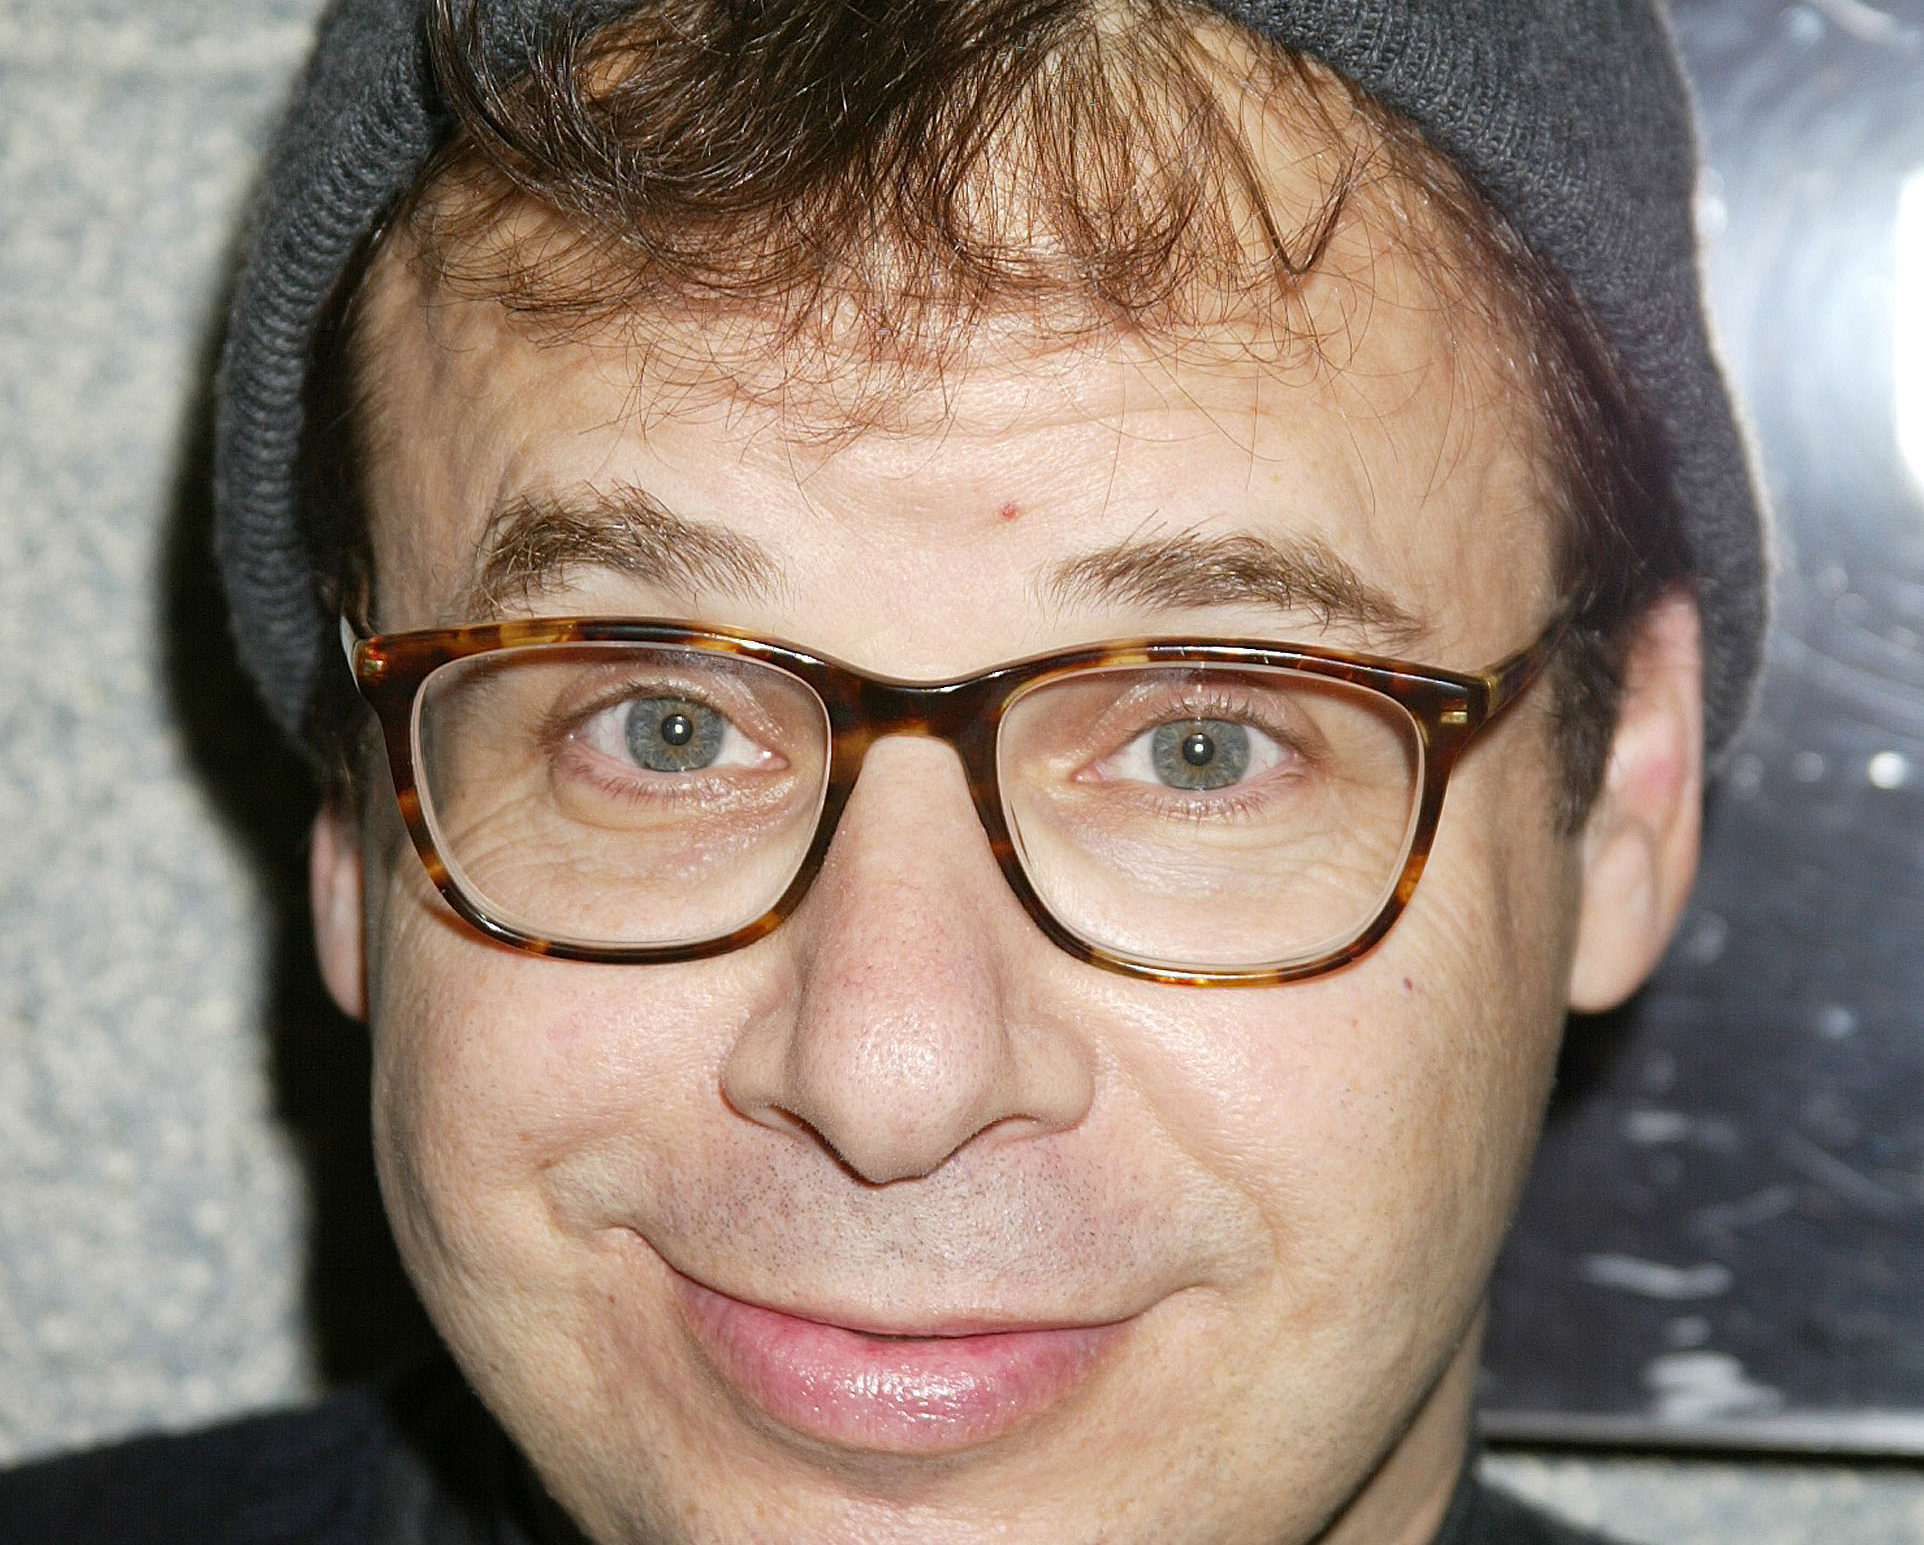 ‘Honey, I Shrunk The Kids’ Is Getting Rebooted With Original Star Rick Moranis ...6 日前